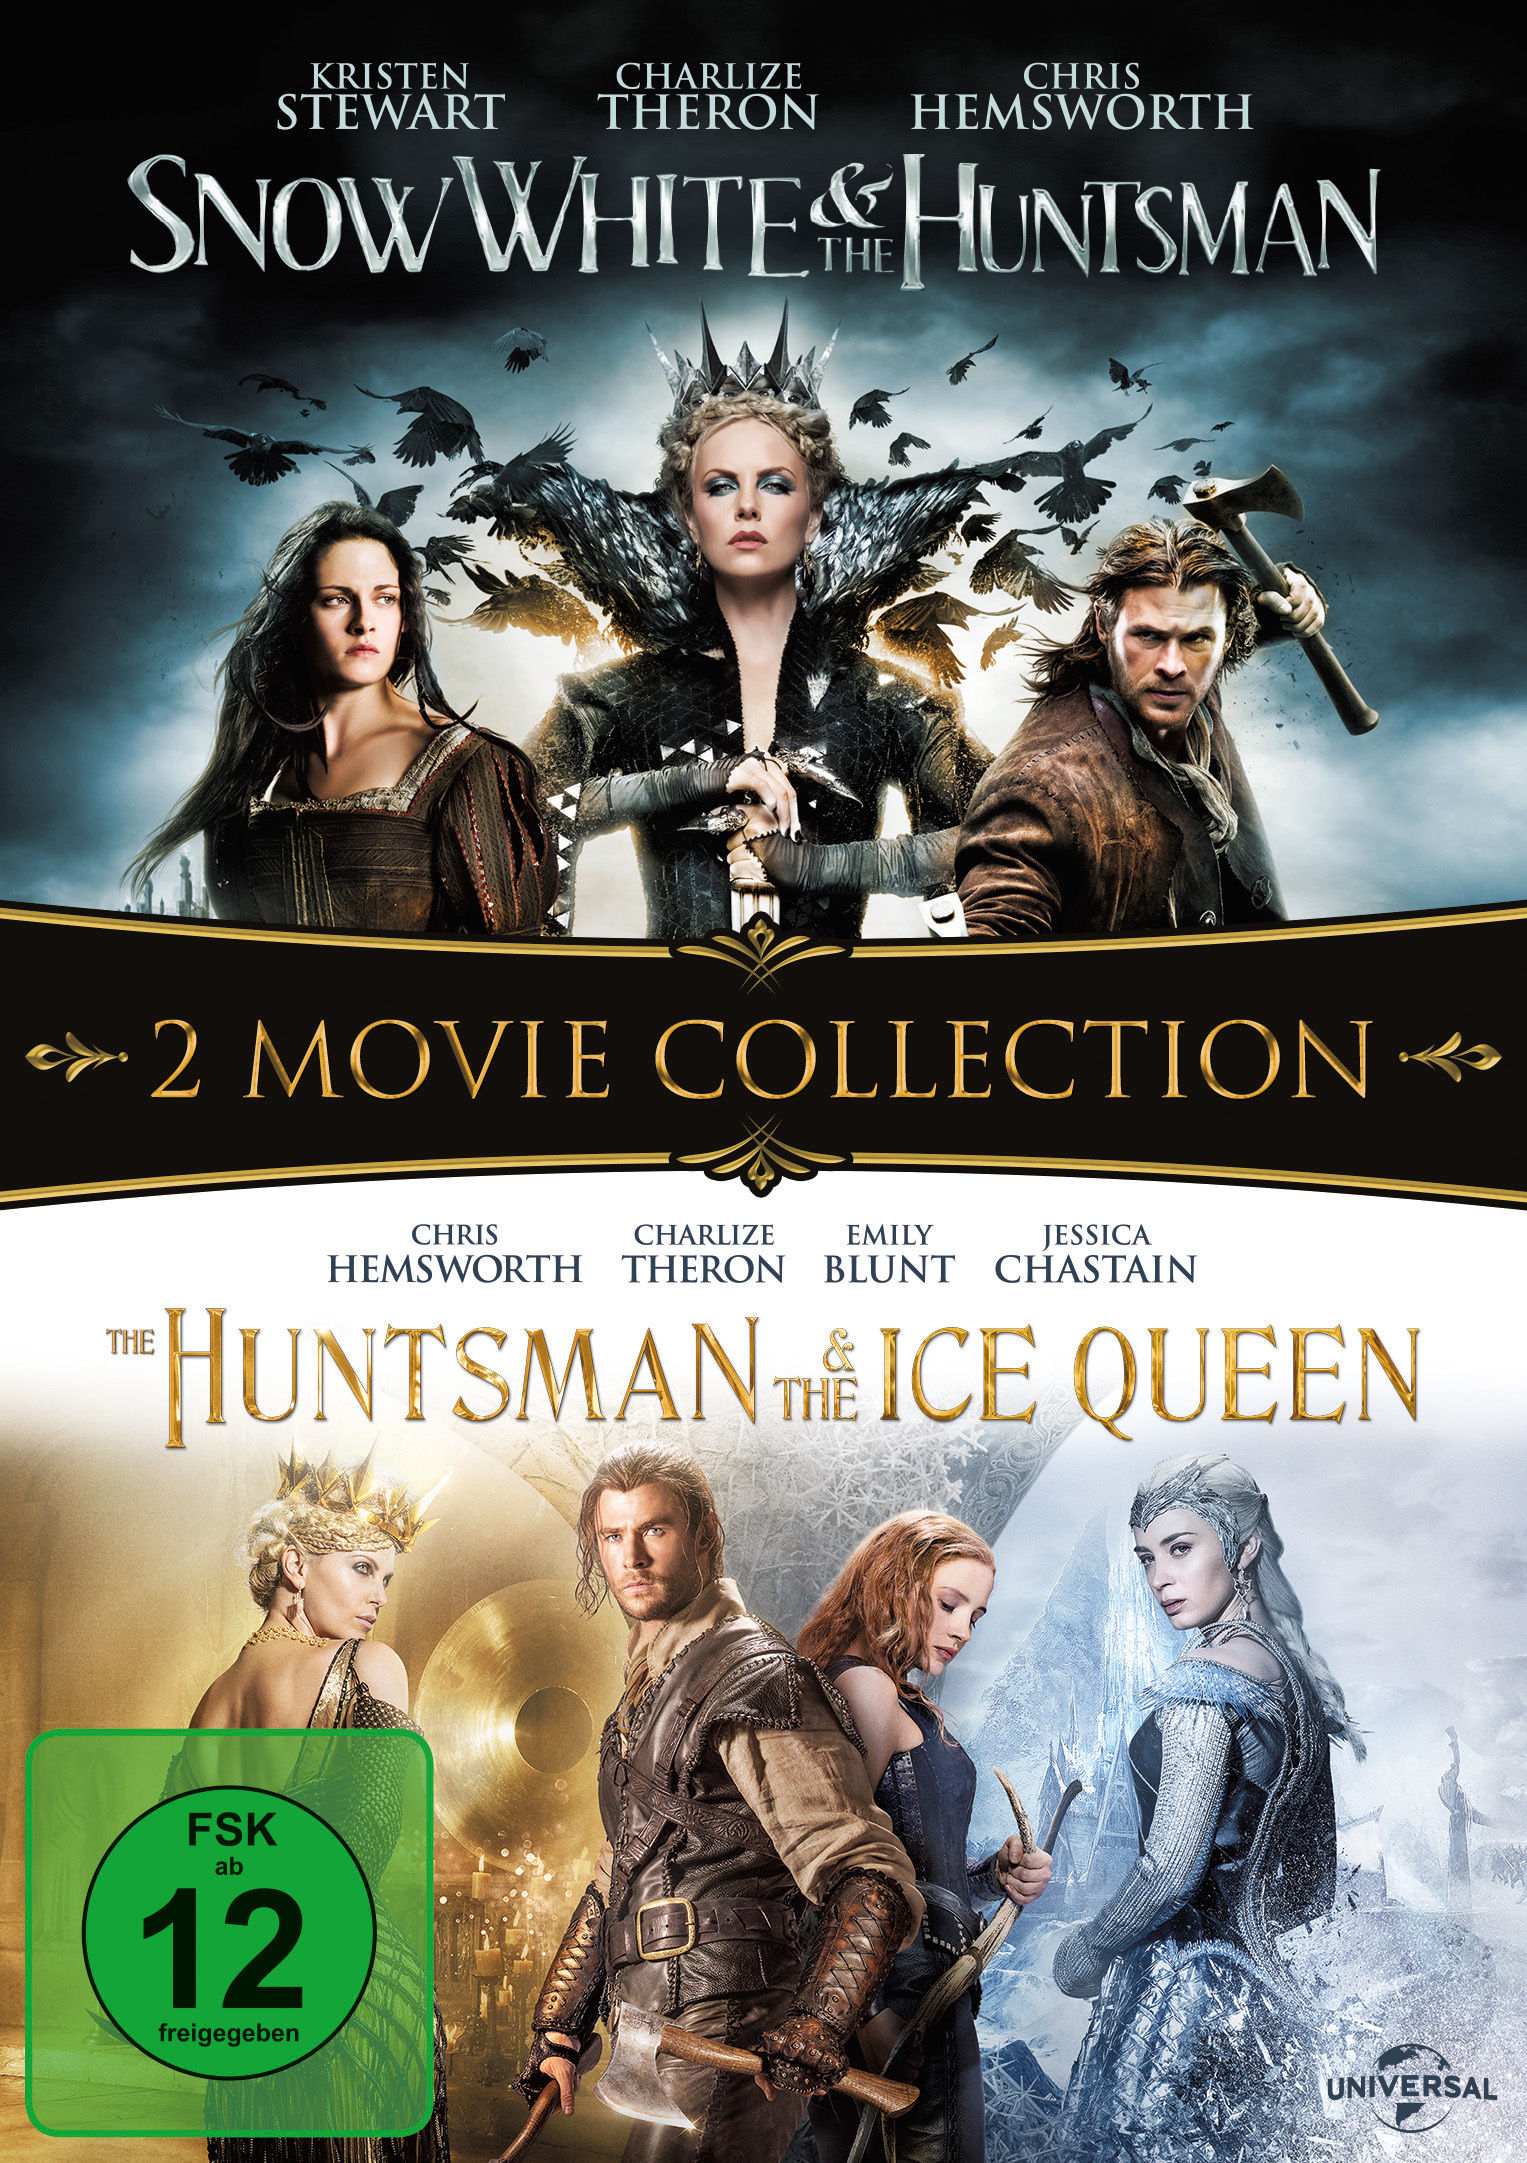 Image of Snow White & the Huntsman / The Huntsman & The Ice Queen